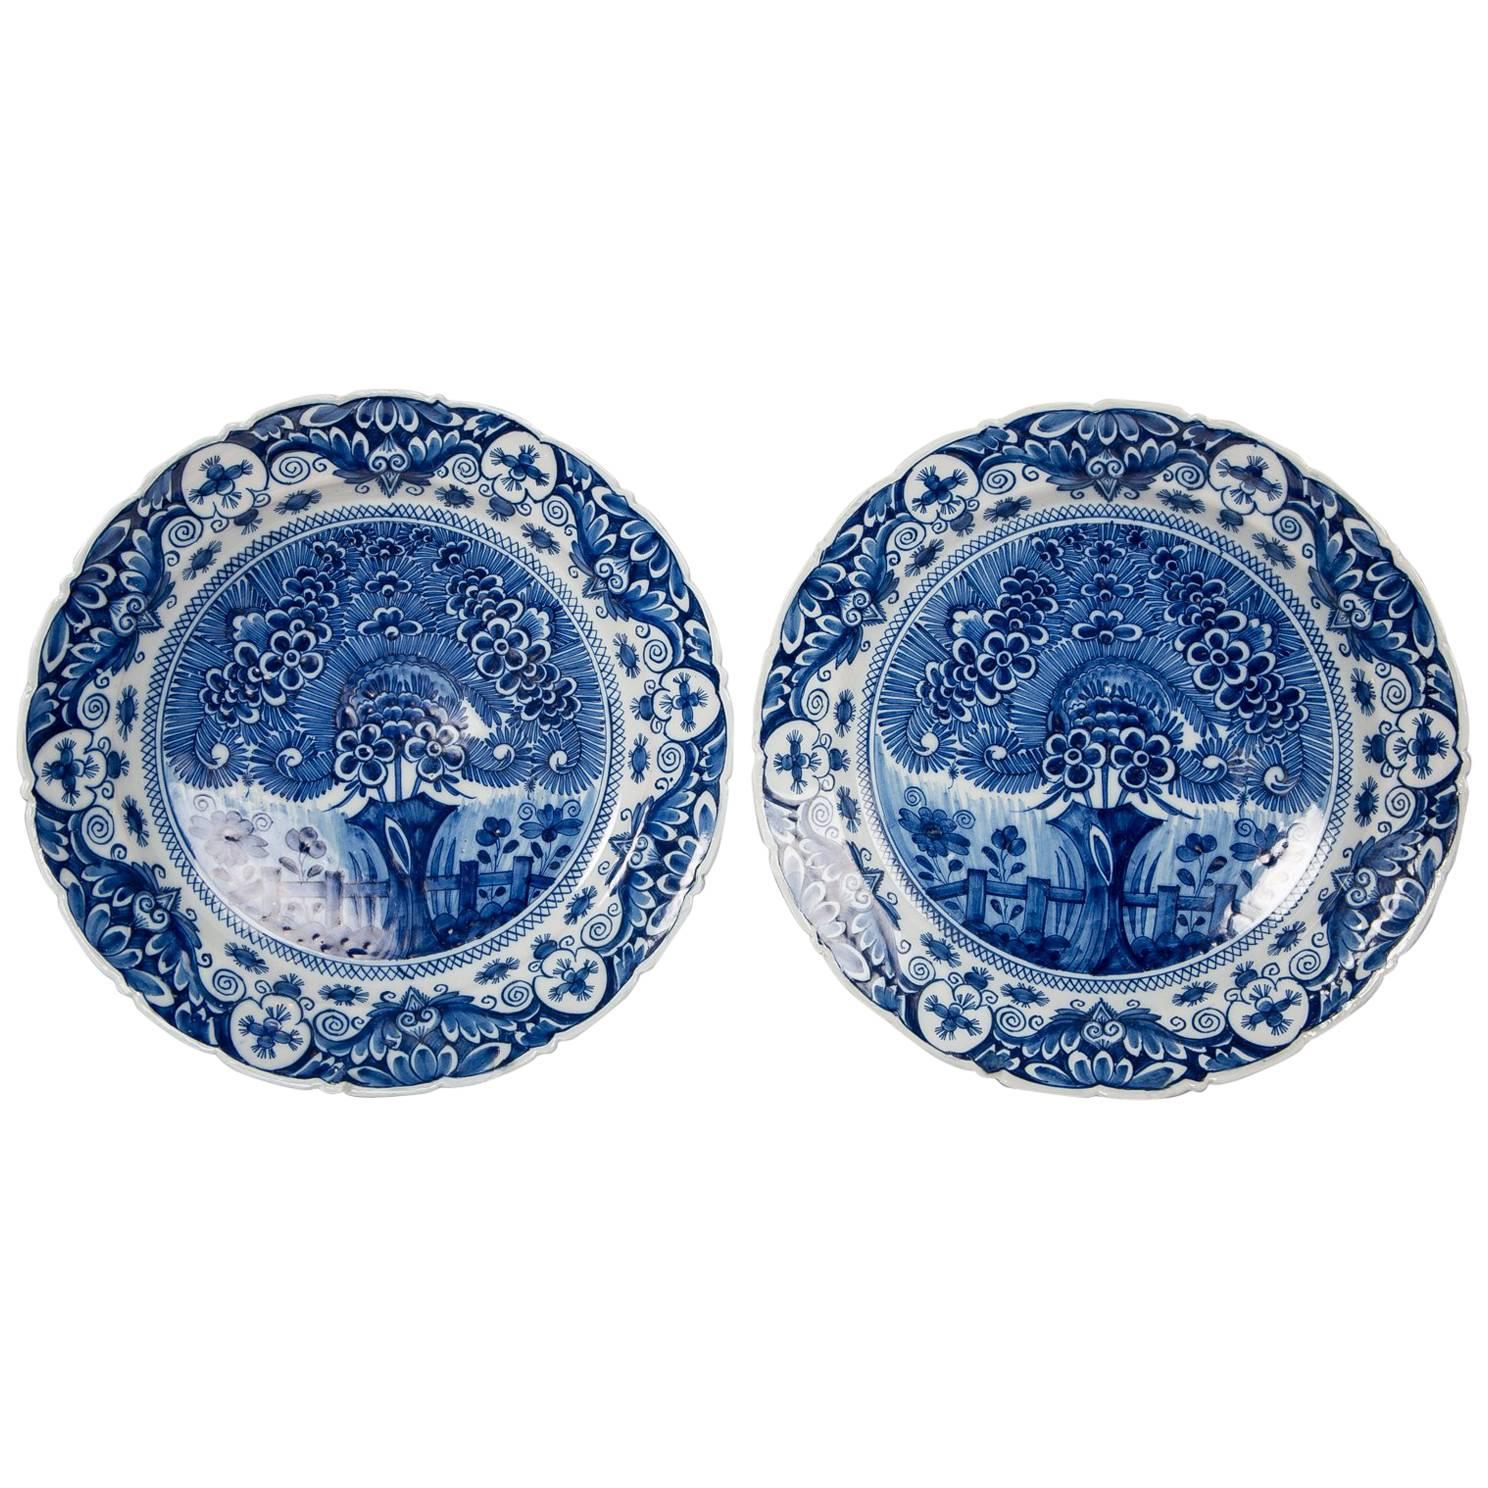 Blue and White Delft Chargers Theeboom Pattern made by "The Claw" circa 1770 For Sale